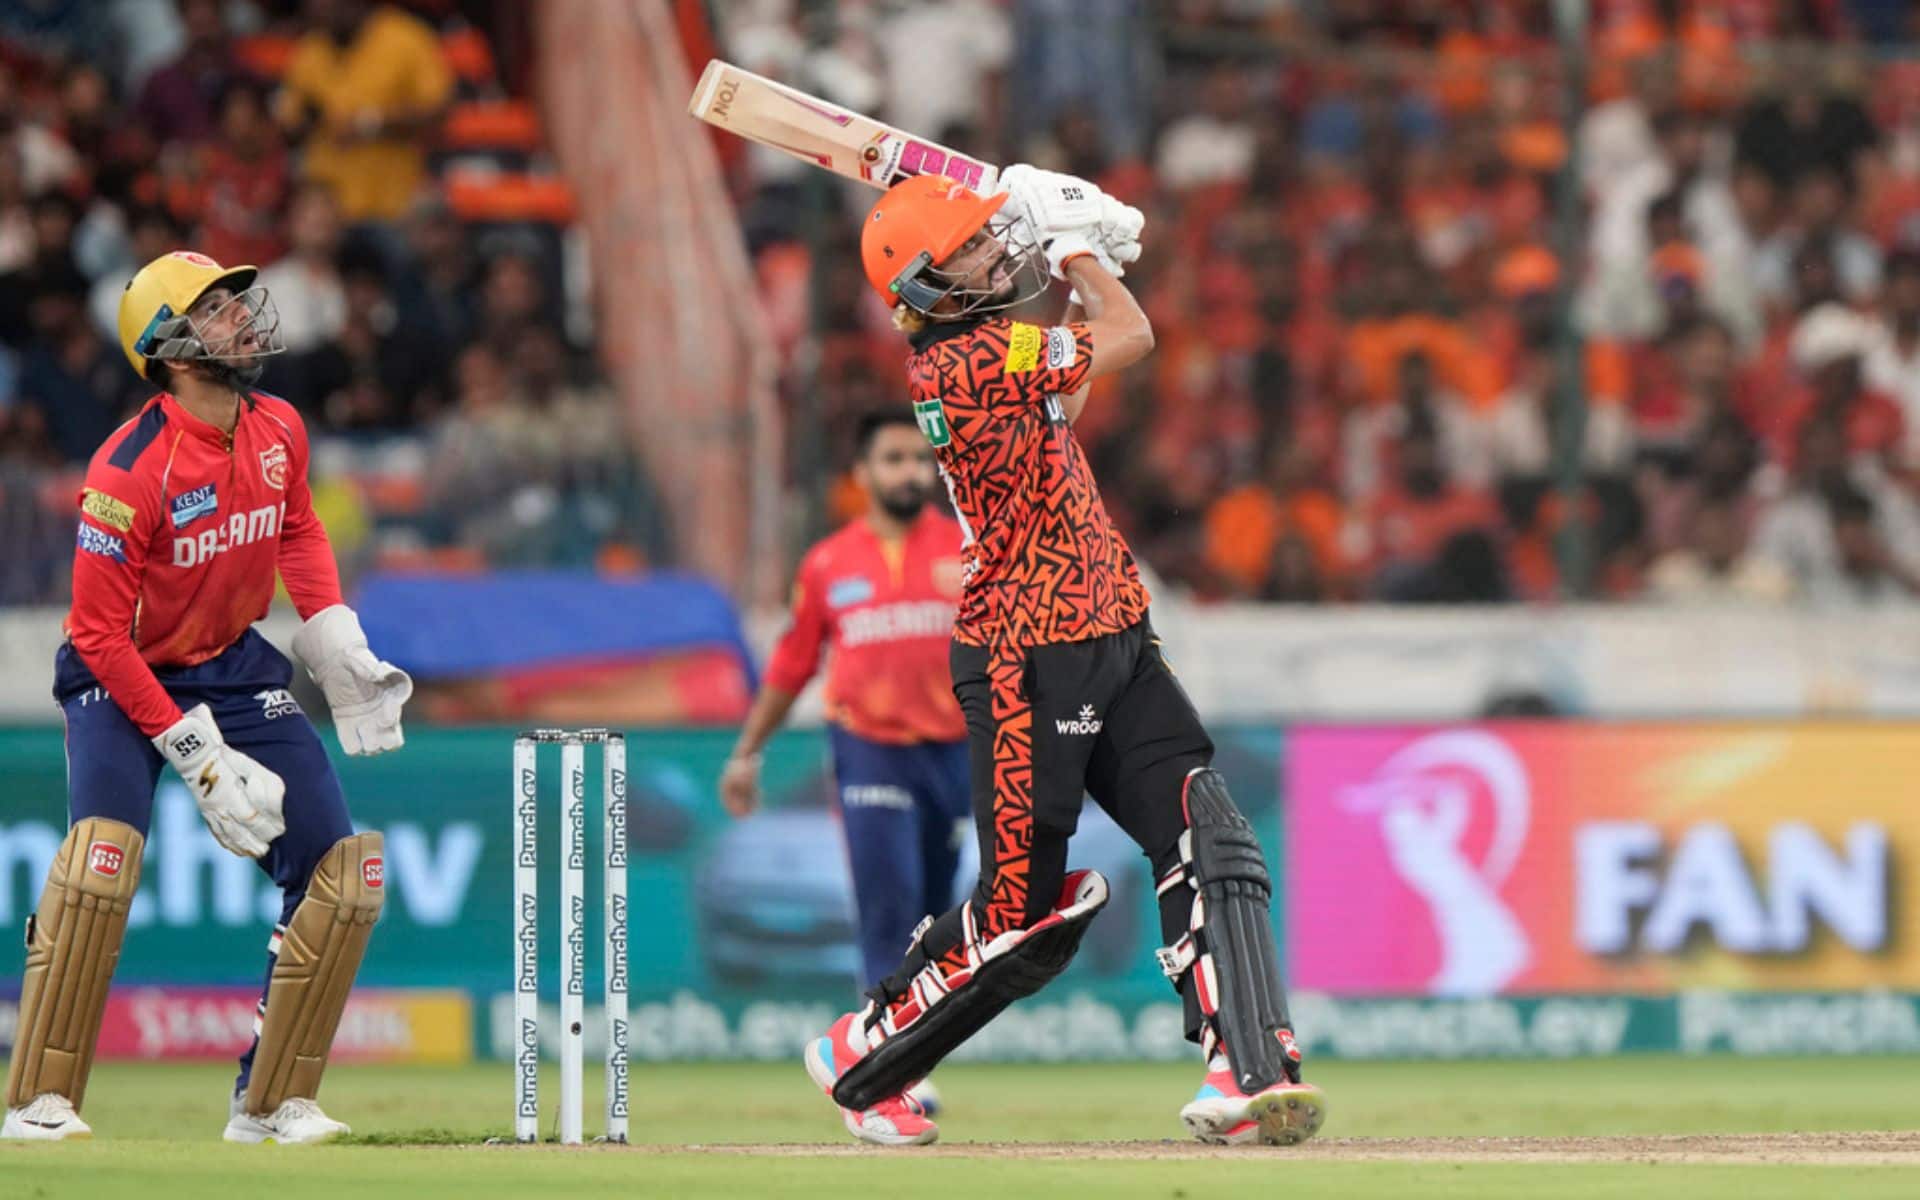 Nitish Reddy will be a key to SRH's success in the match [AP Photos]